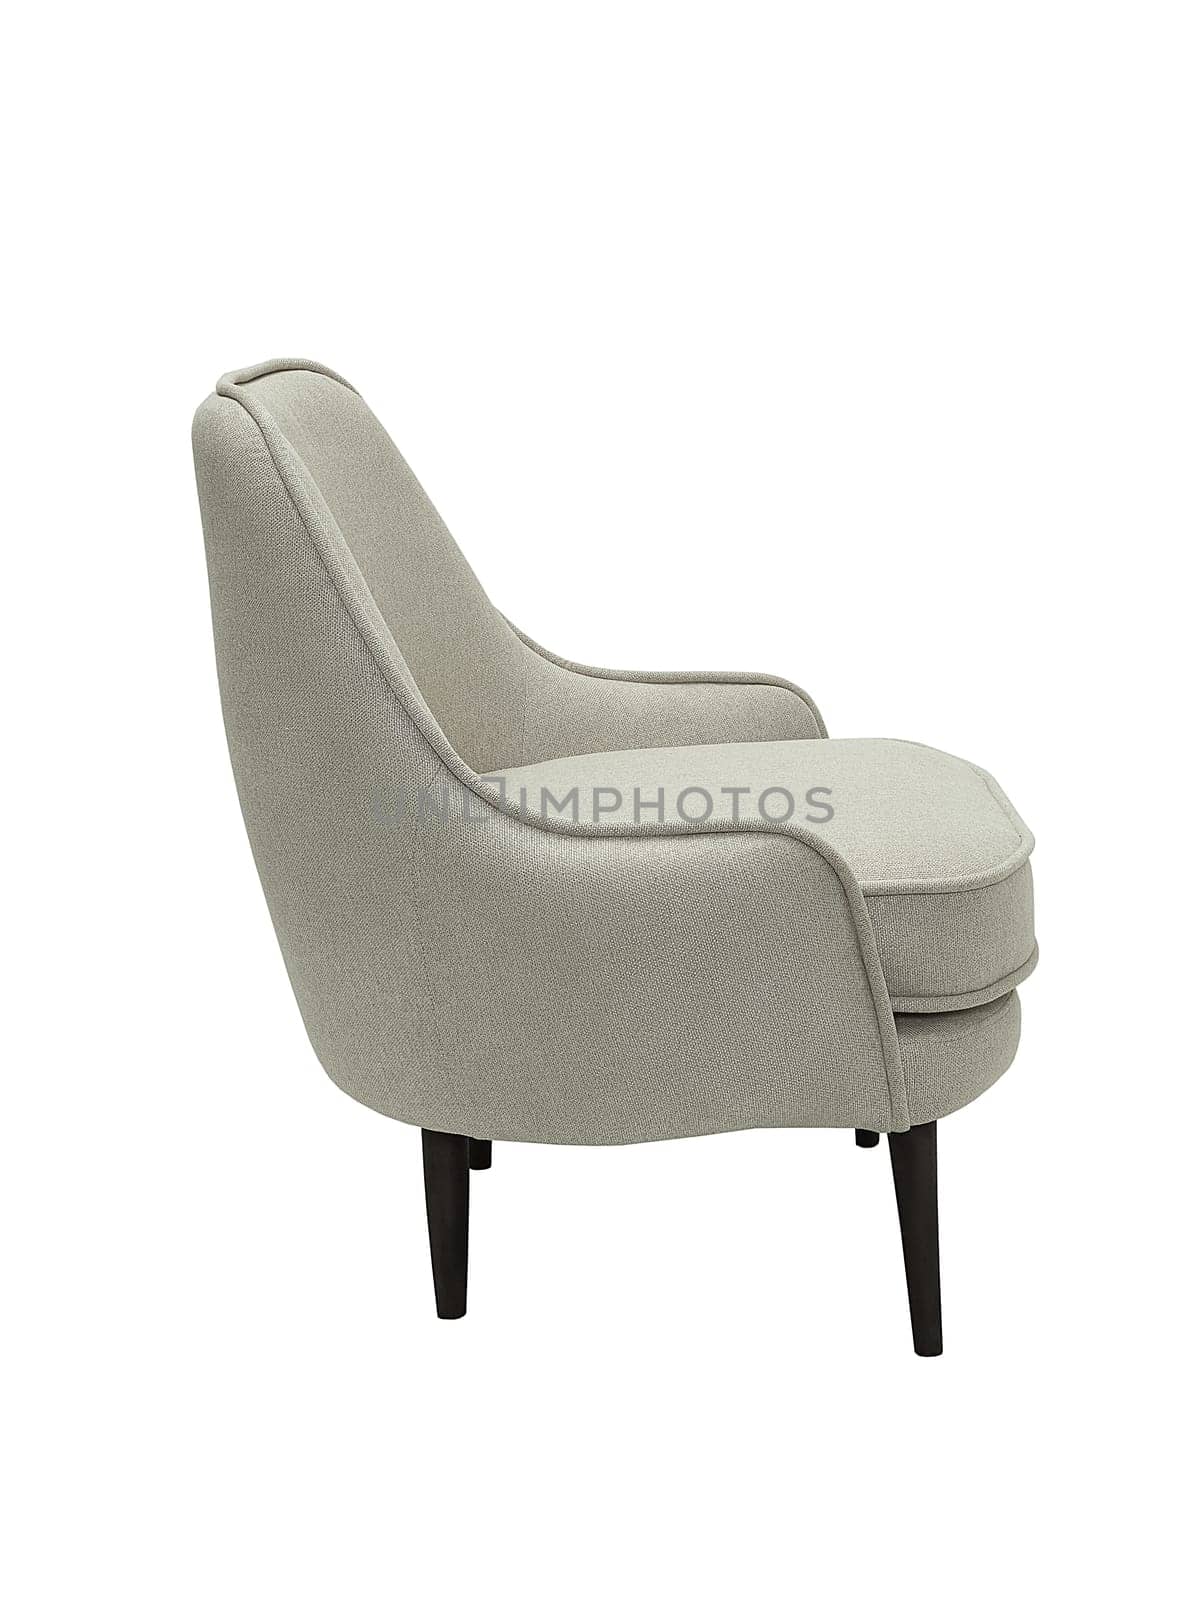 modern fabric grey armchair with wooden legs isolated on white background, side view.